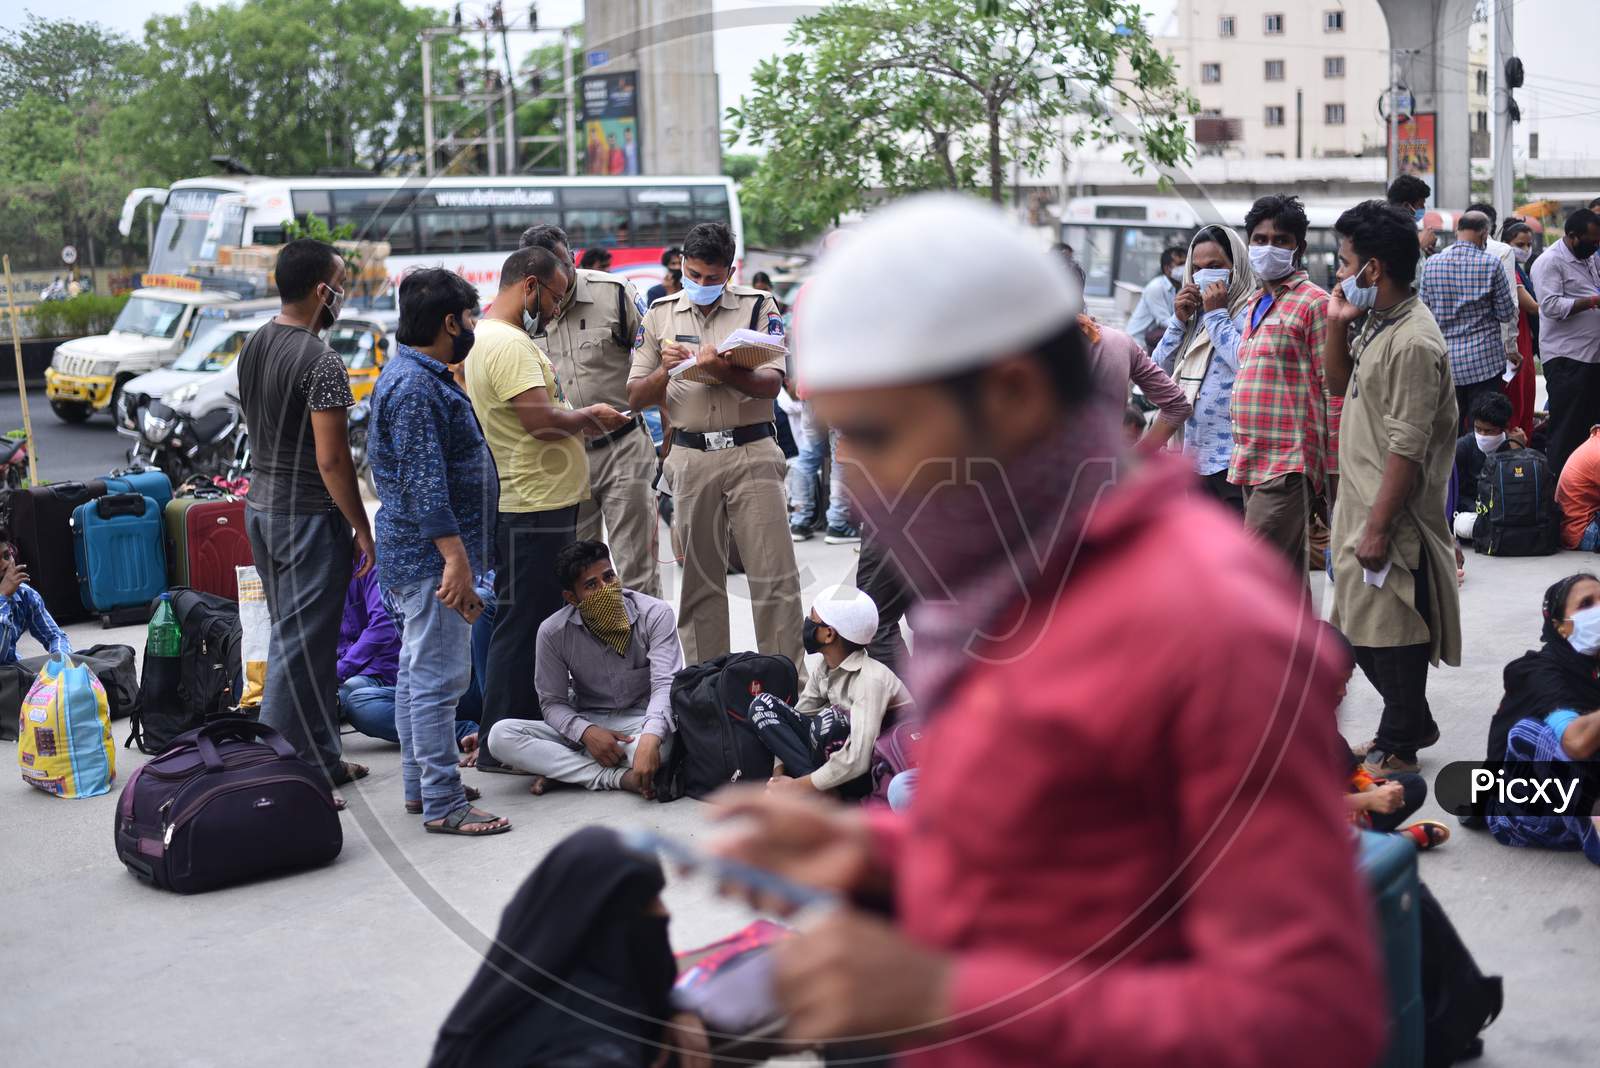 Cyberabad Police register details of Migrant workers to send them to their native states through Shramik Special Trains during the ongoing lockdown amid coronavirus pandemic, May 19,2020